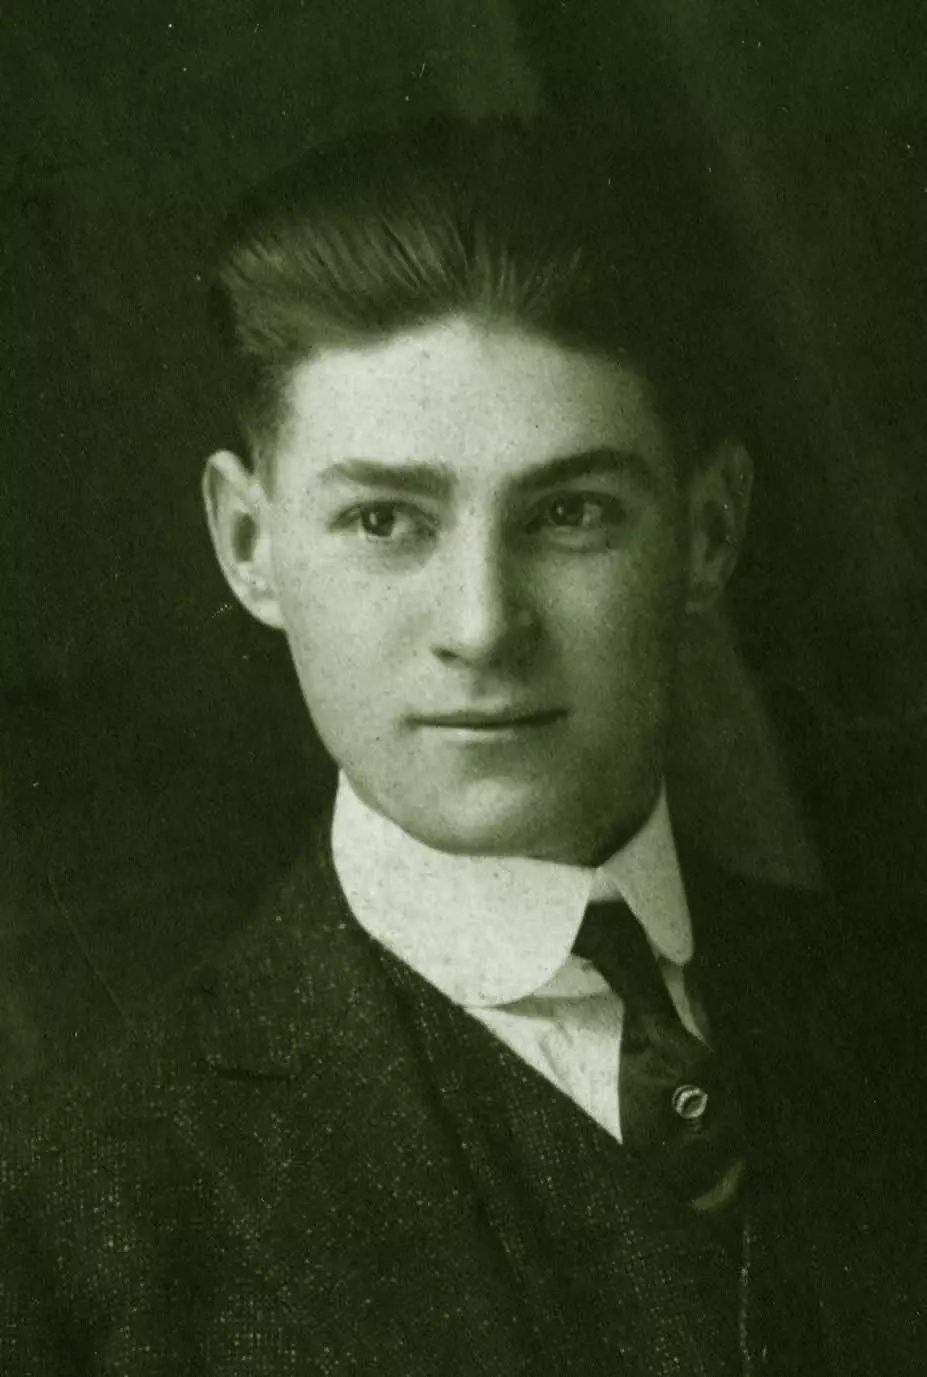 A young man in a suit and tie looks to the left of the camera. He has thick dark hair that is combed backwards.